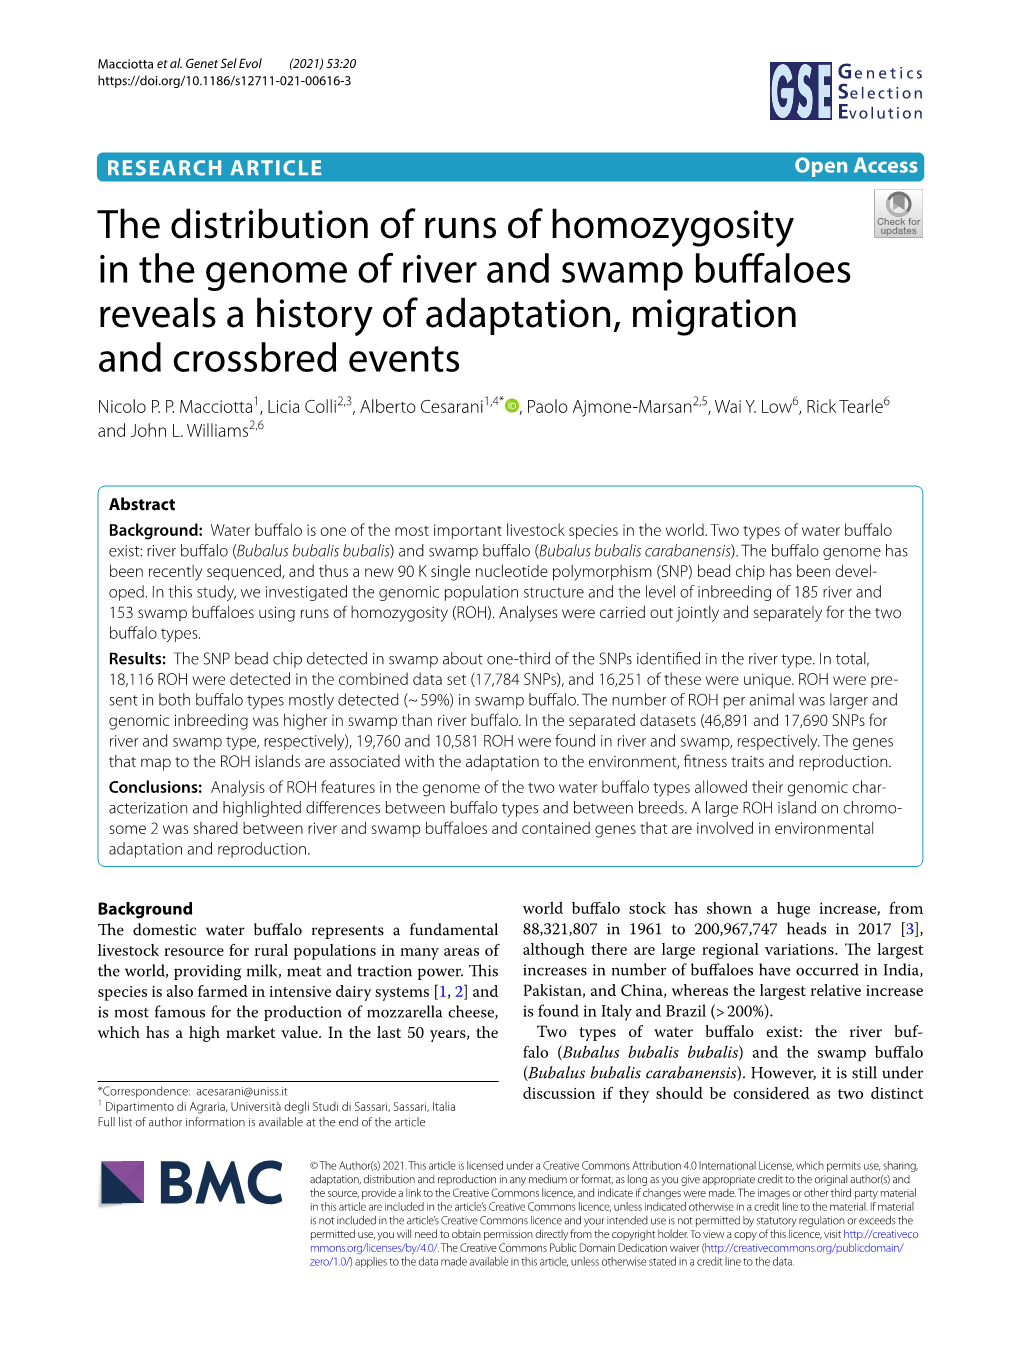 The Distribution of Runs of Homozygosity in the Genome of River and Swamp Bufaloes Reveals a History of Adaptation, Migration and Crossbred Events Nicolo P